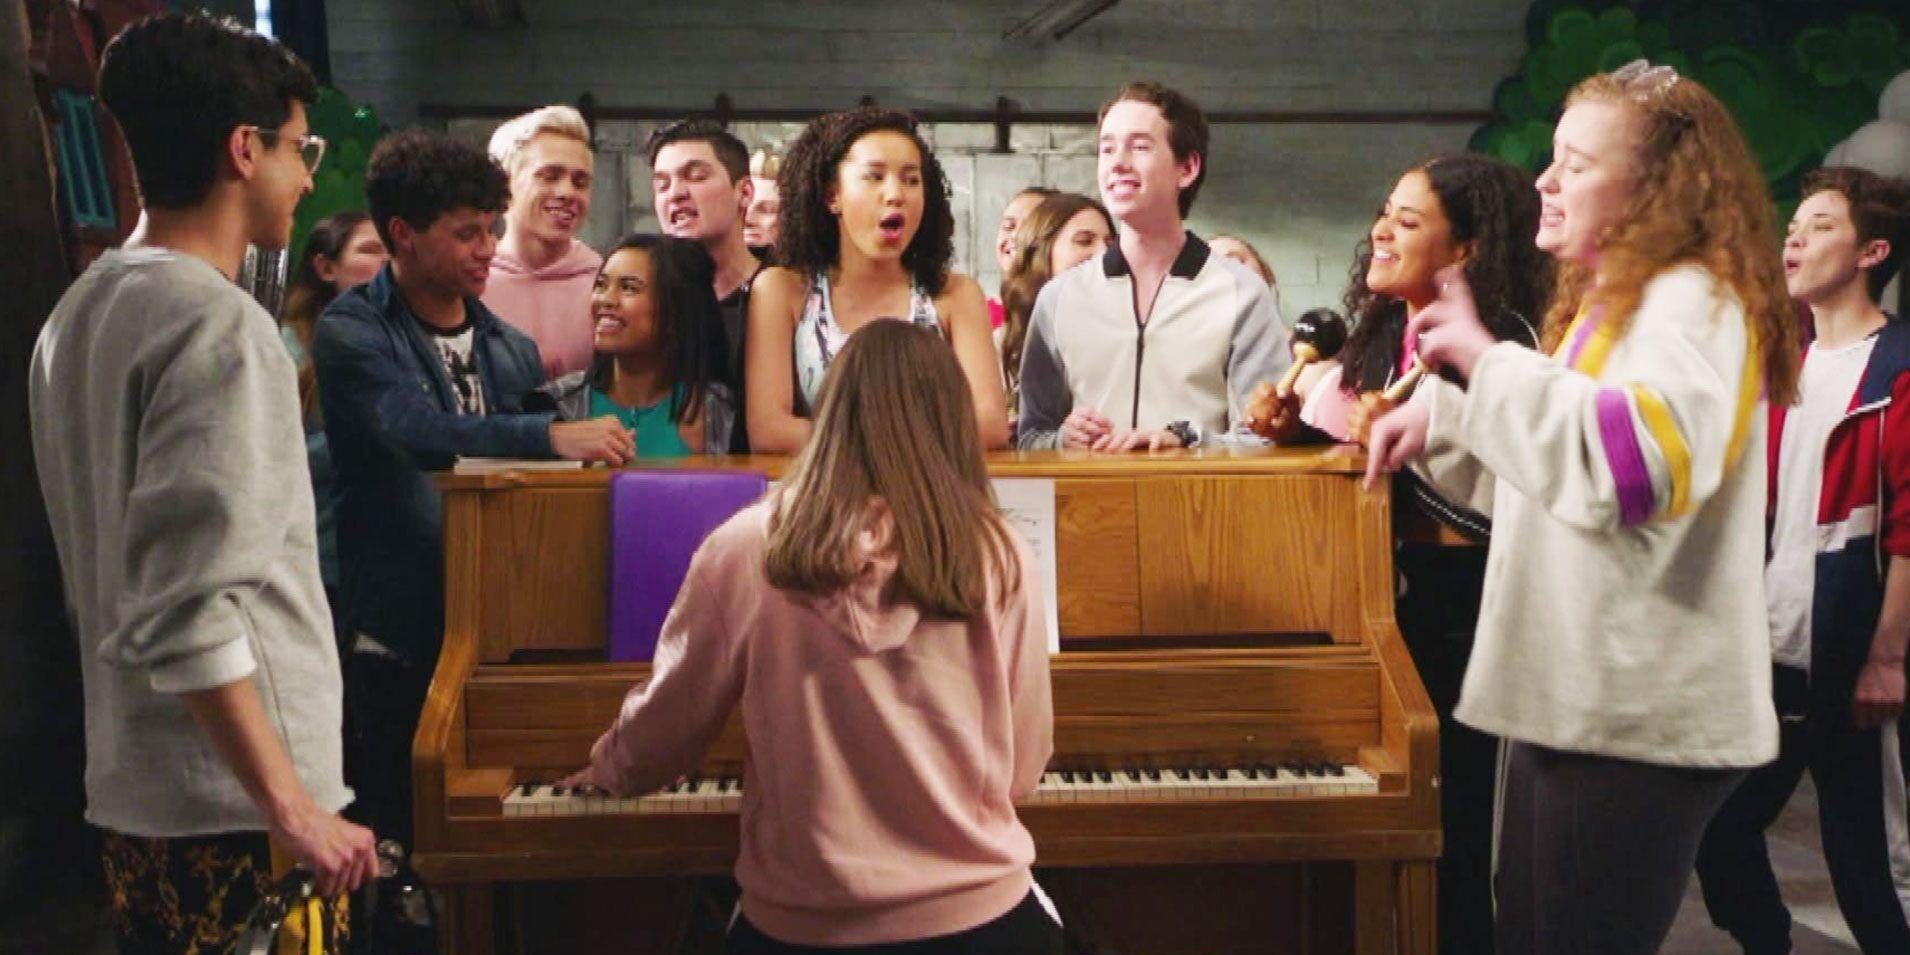 The cast of High School Musical: The Musical: The Series singing around a piano